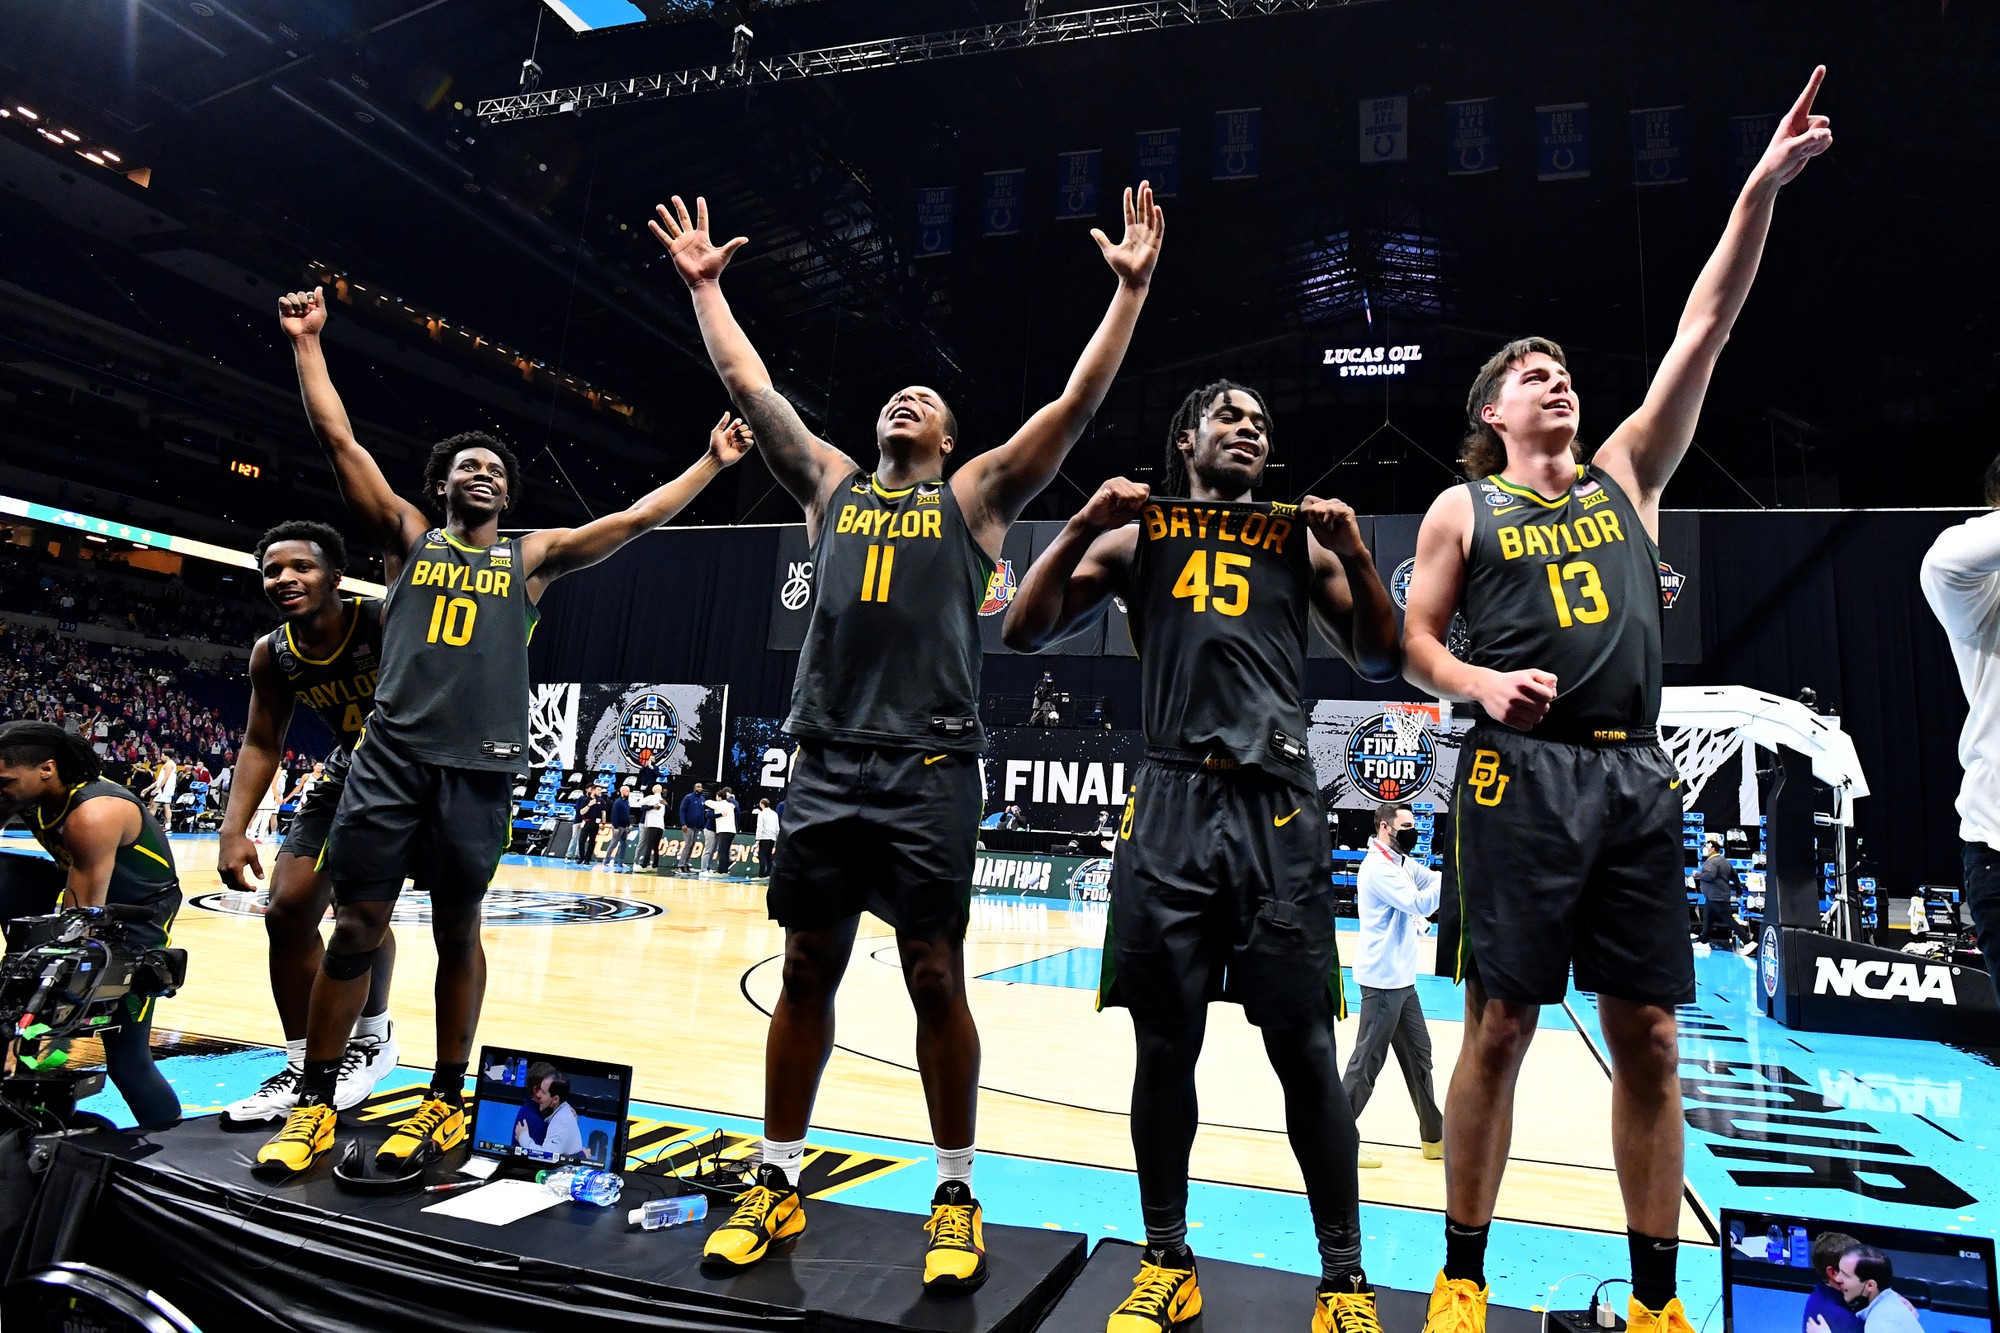 Sports Take: Baylor has always been a basketball school | The Baylor Lariat